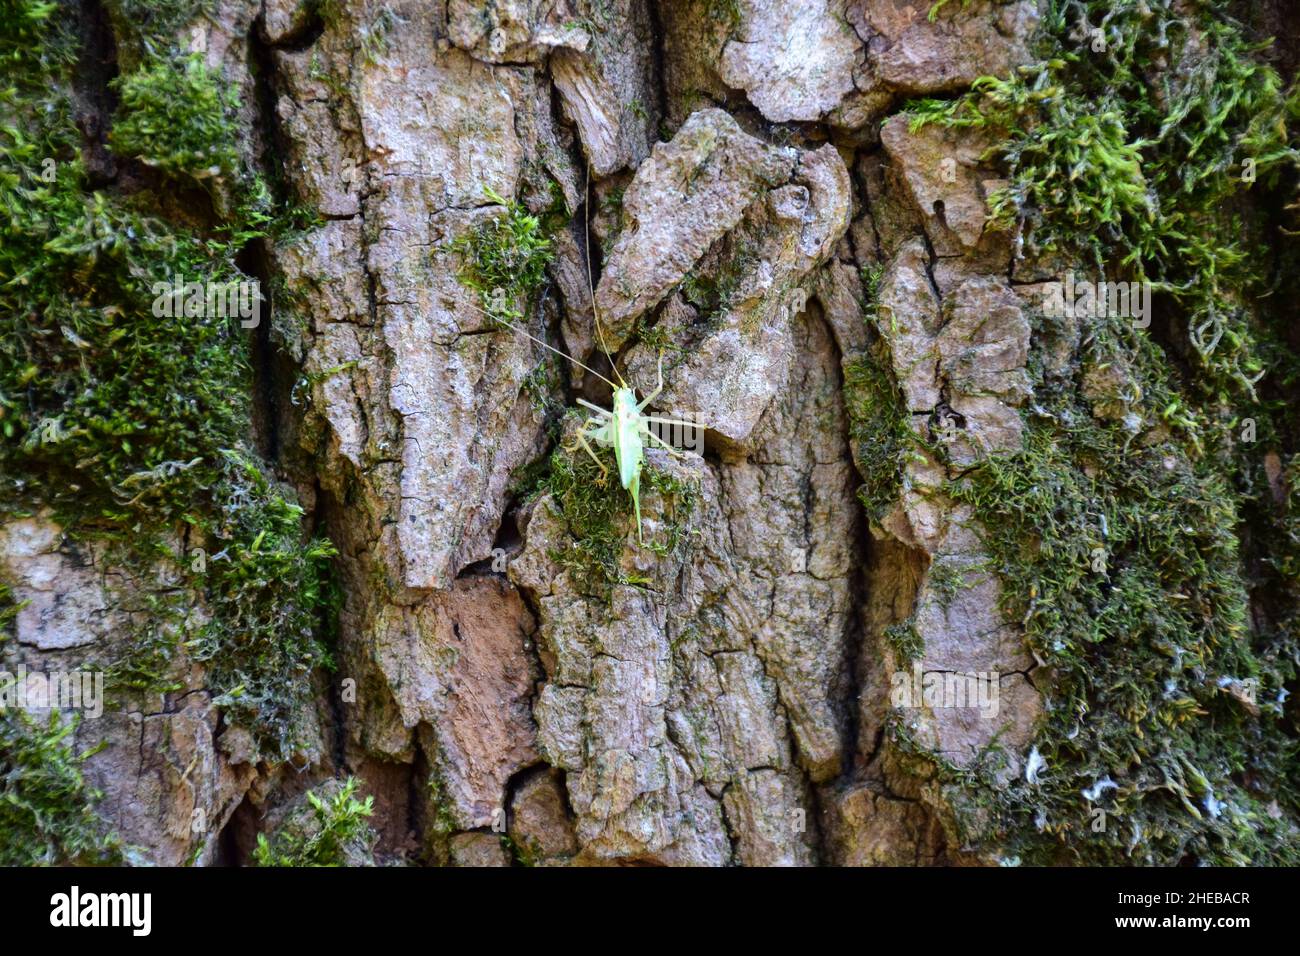 A small green grasshopper sits on the bark of an old large tree covered with moss Stock Photo